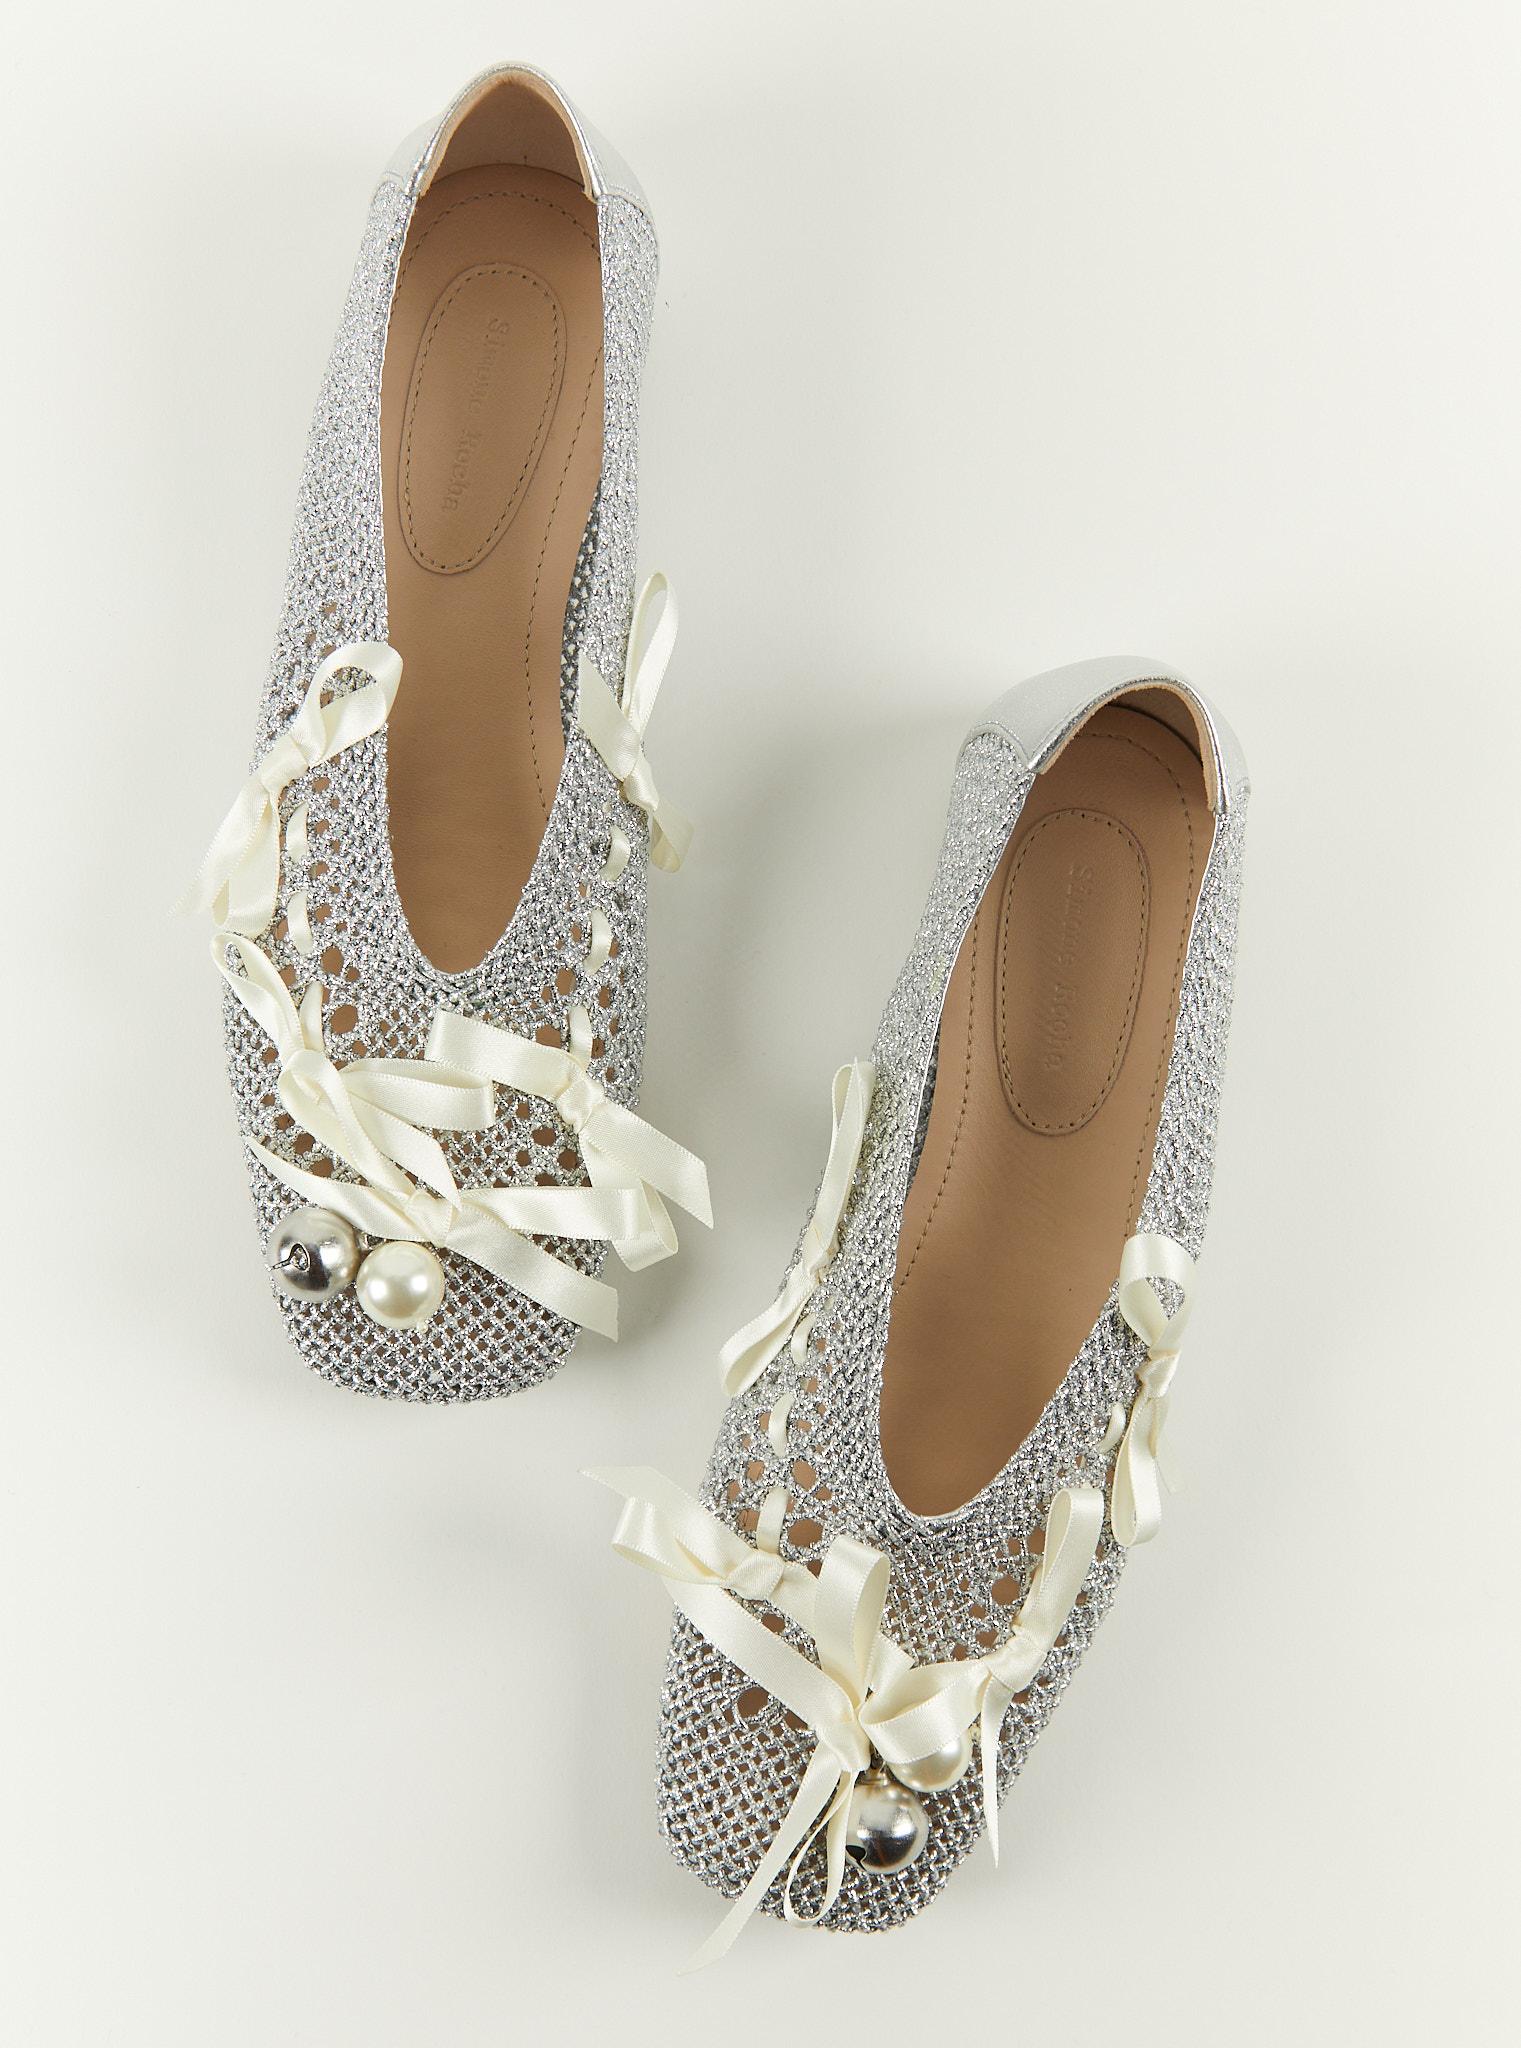 SIMONE ROCHA SS24 Bell Charm Crochetted Ballet Flats - Size 40 (EU) In New Condition For Sale In London, GB